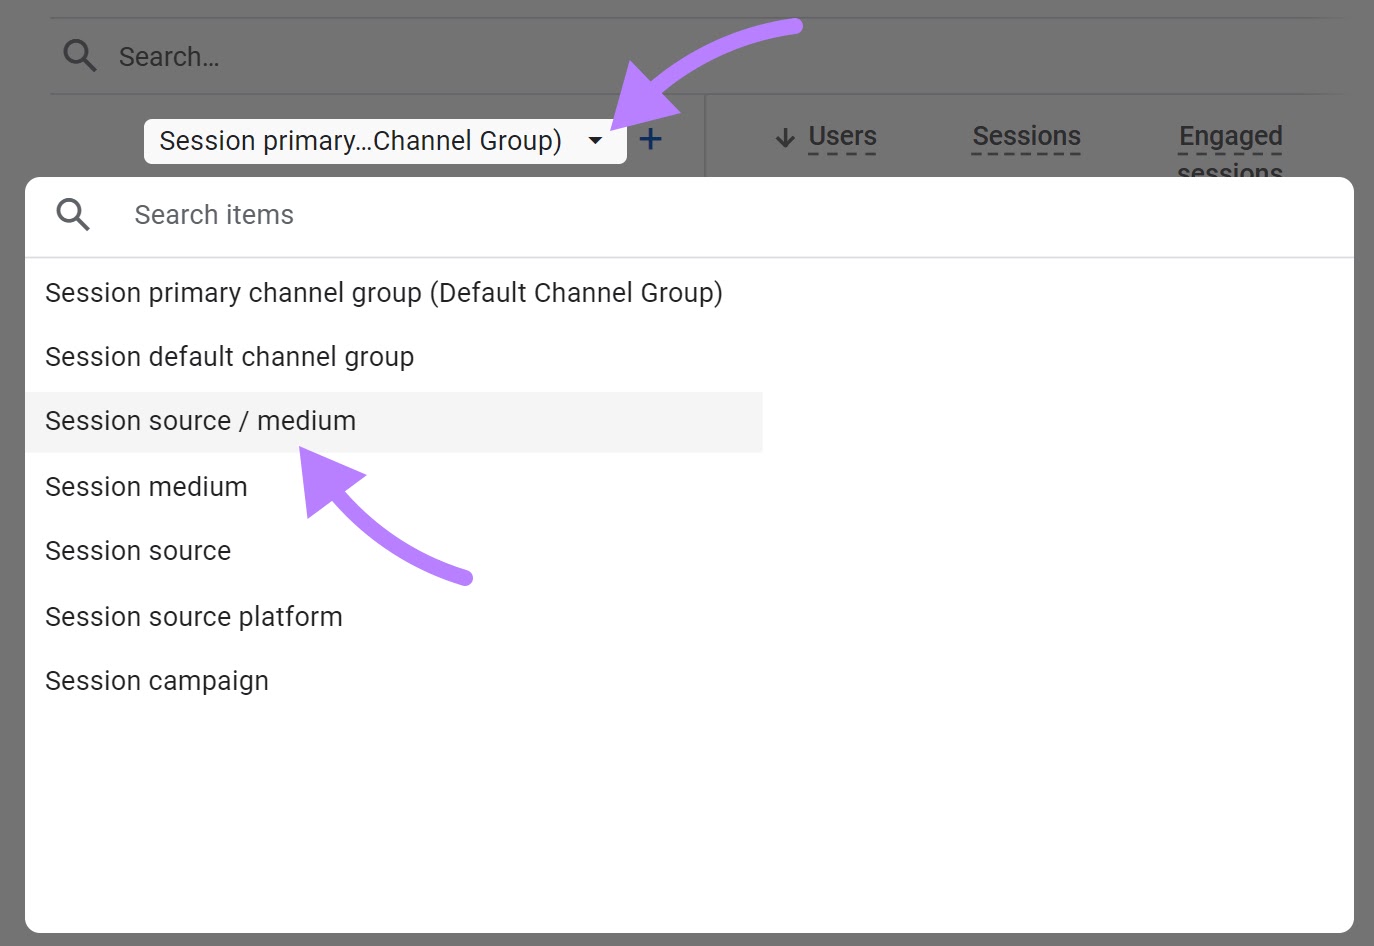 “Session source / medium" selected under “Session primary channel group (Default Channel Group)" drop-down menu